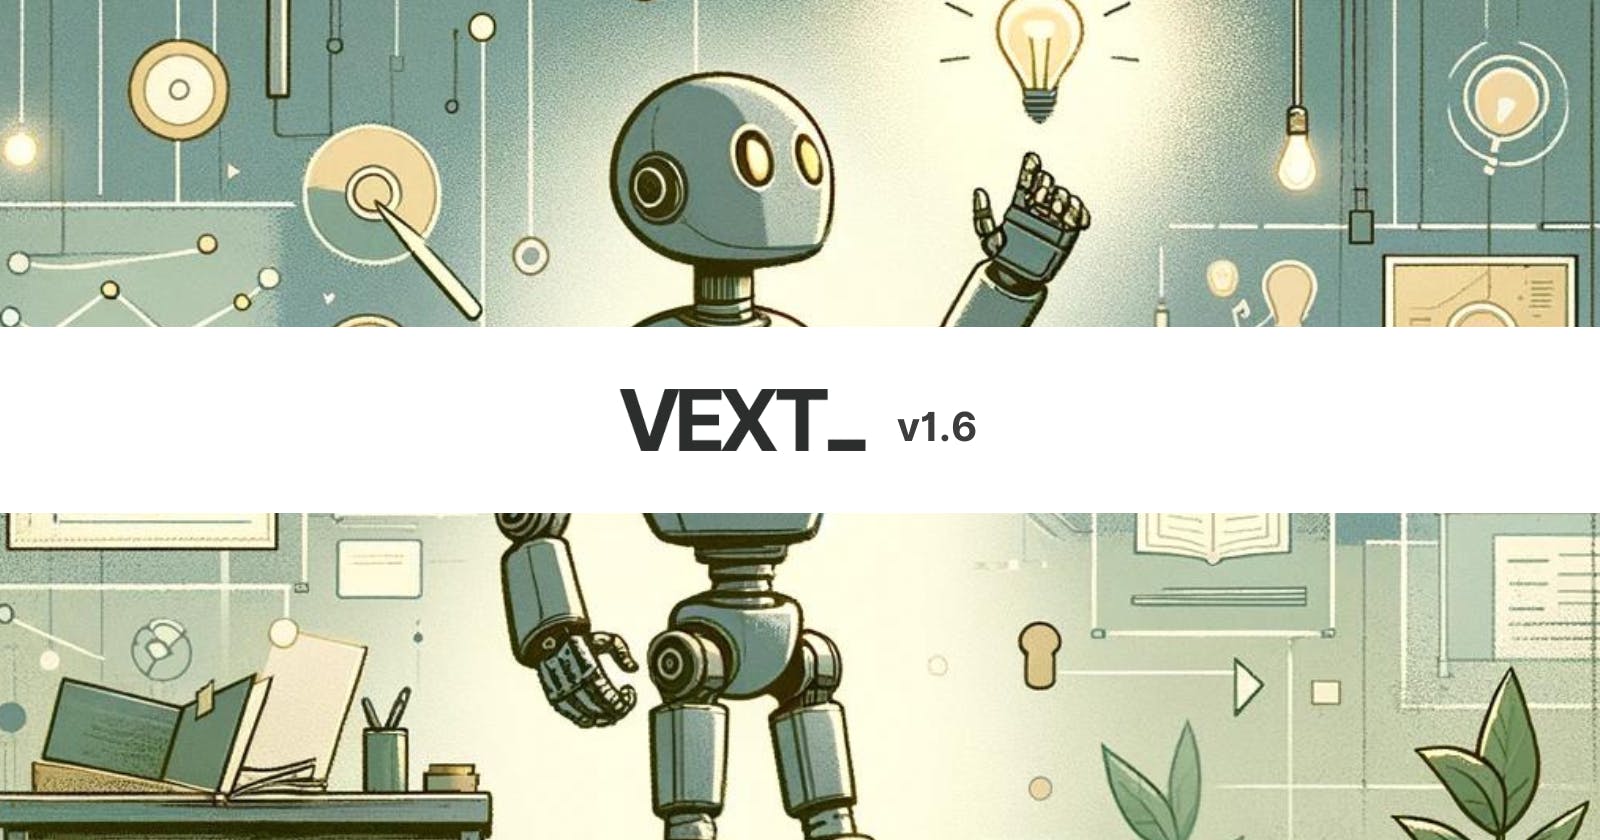 Vext v1.6: Enhanced LLM Project Endpoint, Better Logging, New Mode, and More